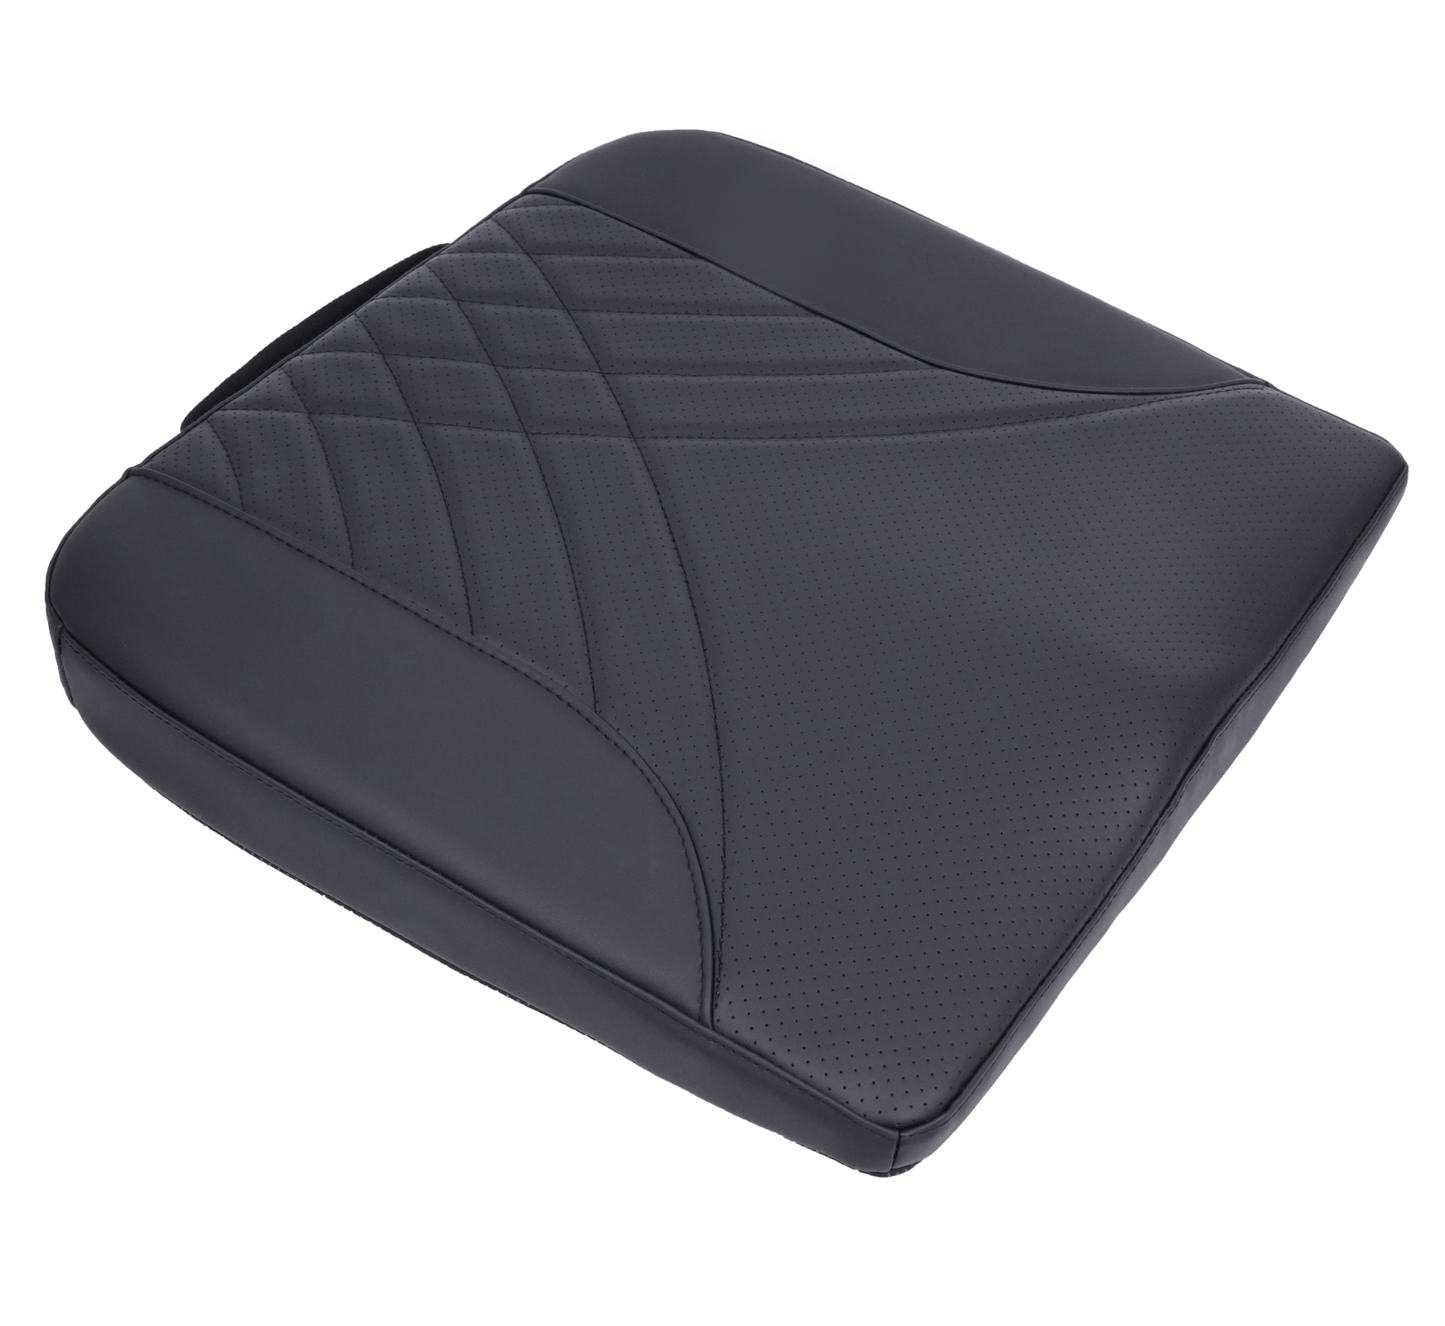 kingphenix Premium Car Seat Cushion, Memory Foam Driver Seat Cushion to Improve Driving View- Coccyx & Lower Back Pain Relief - Seat Cushion for Car, Truck, Office Chair